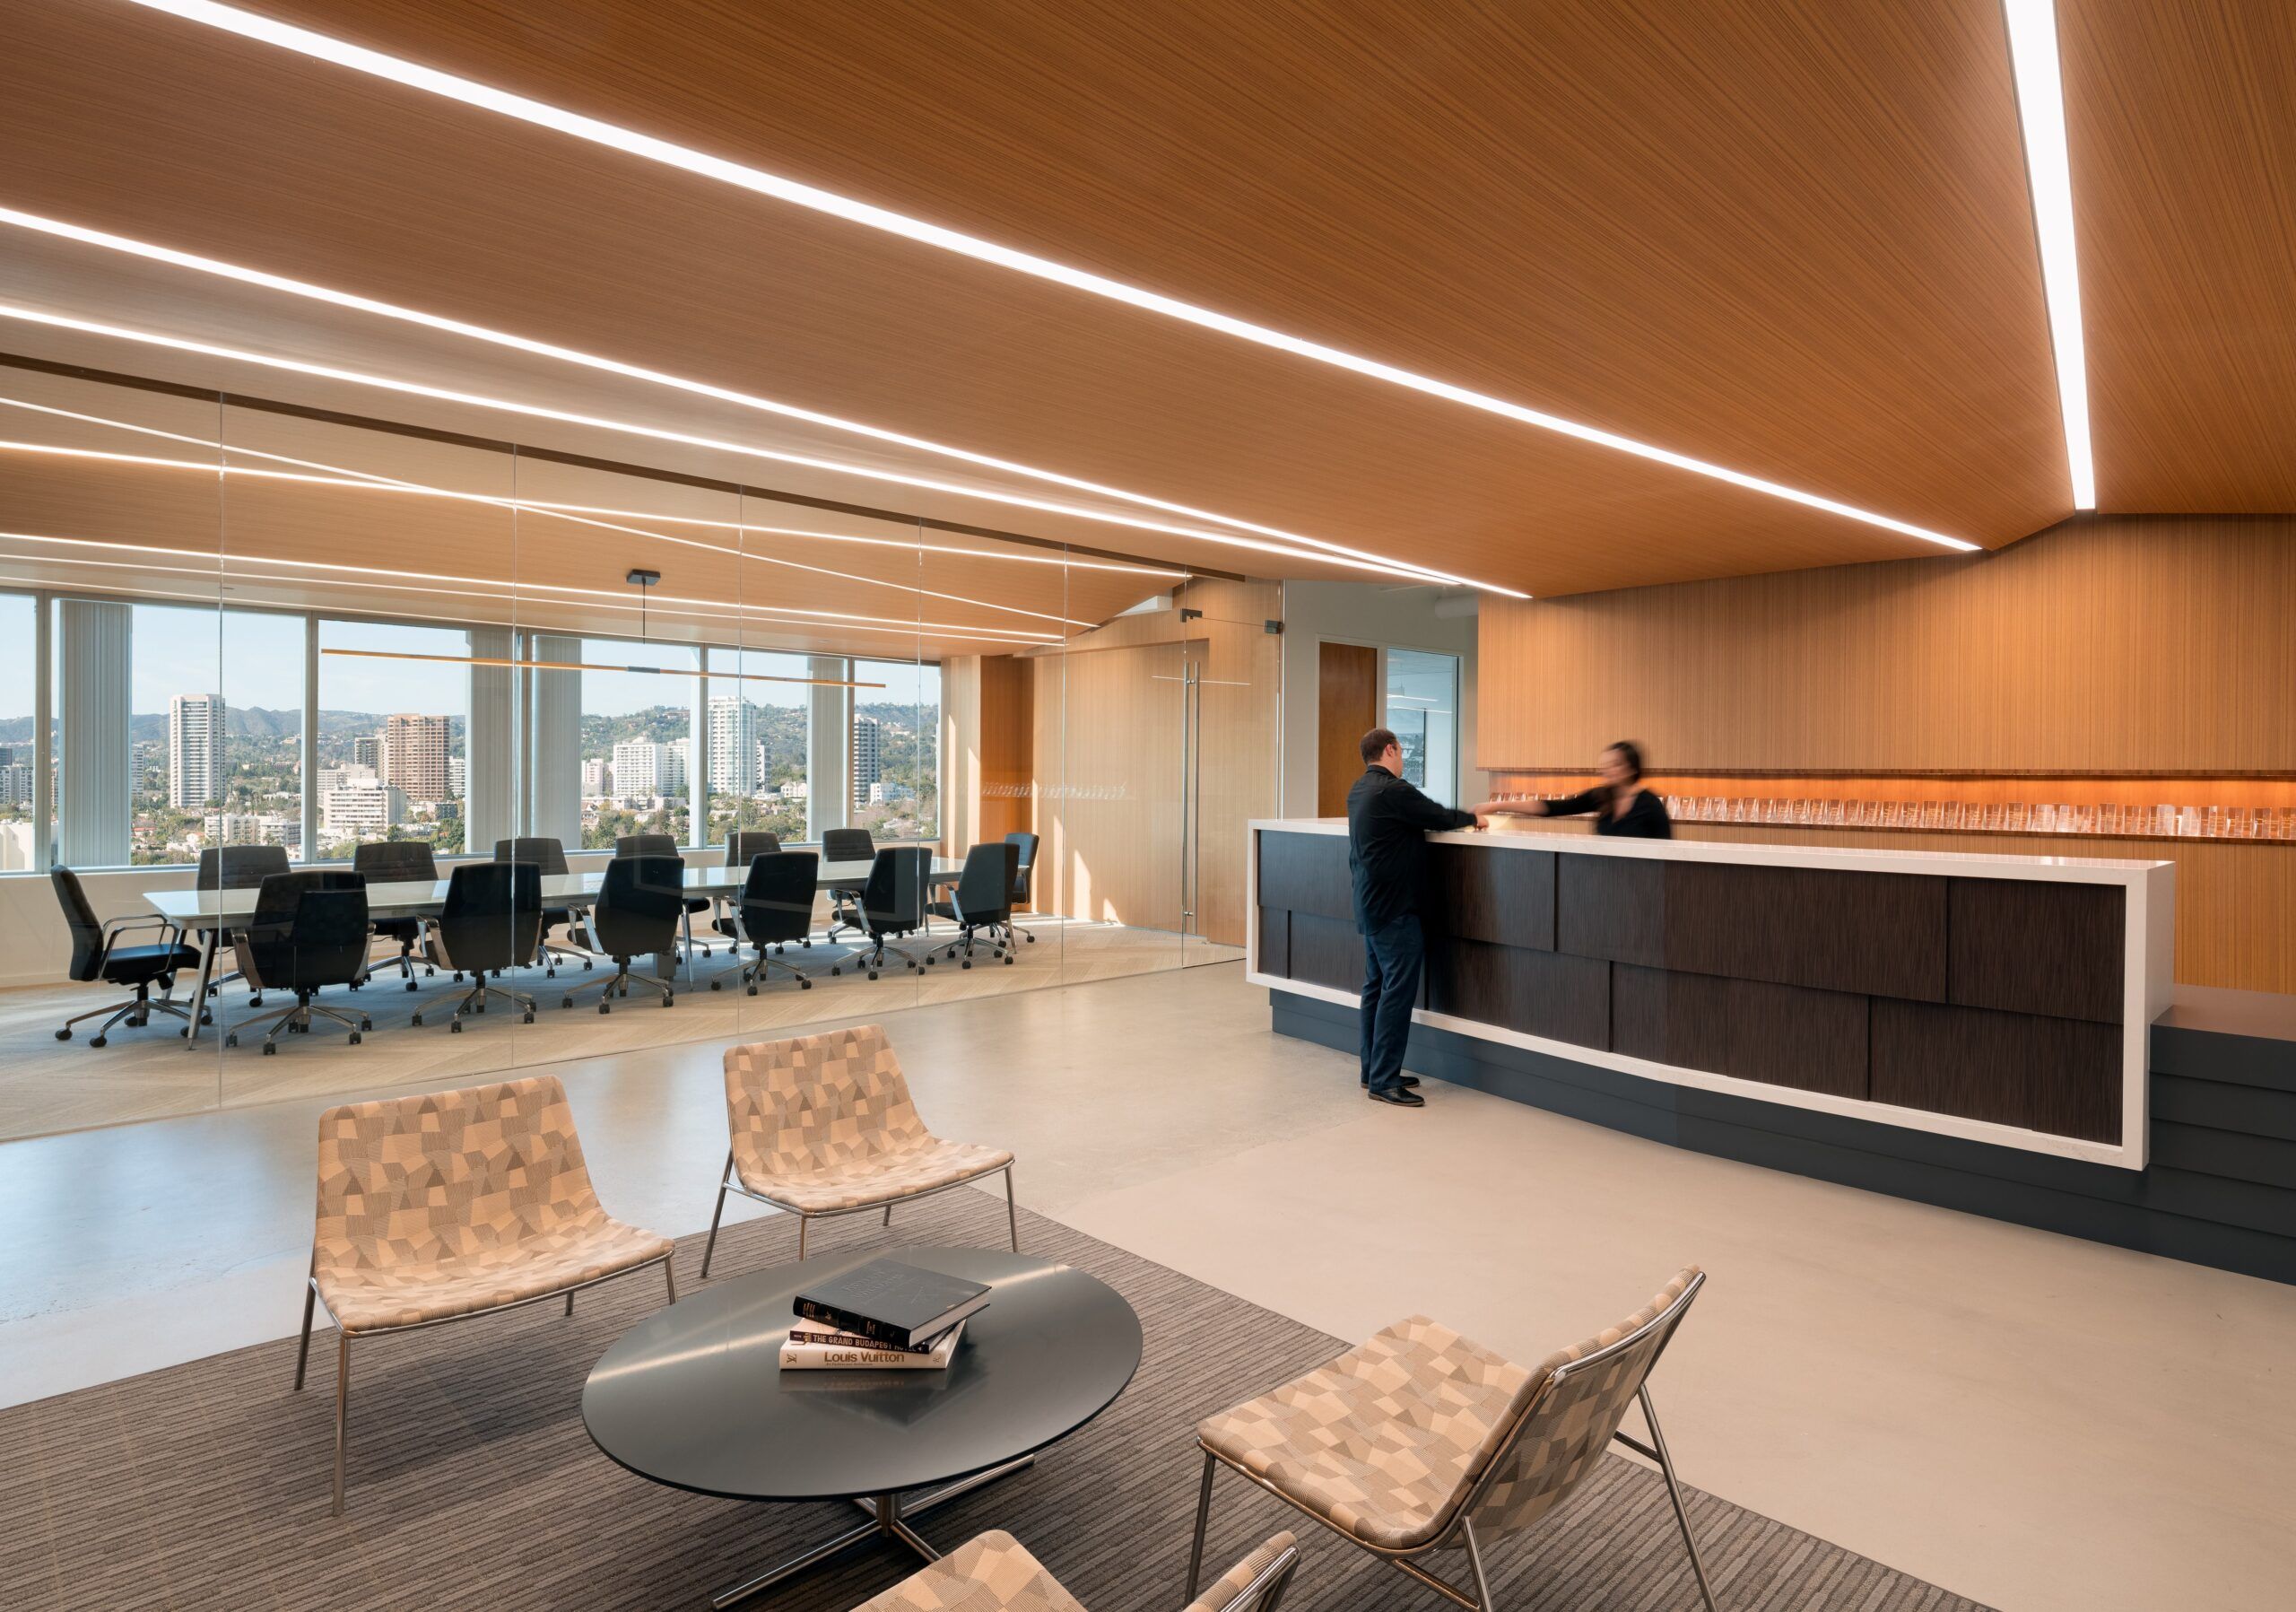 Perris Weber explained that Alcon Lighting was ahead of the curve in anticipating the rising popularity of linear lighting, as pictured in this office lobby